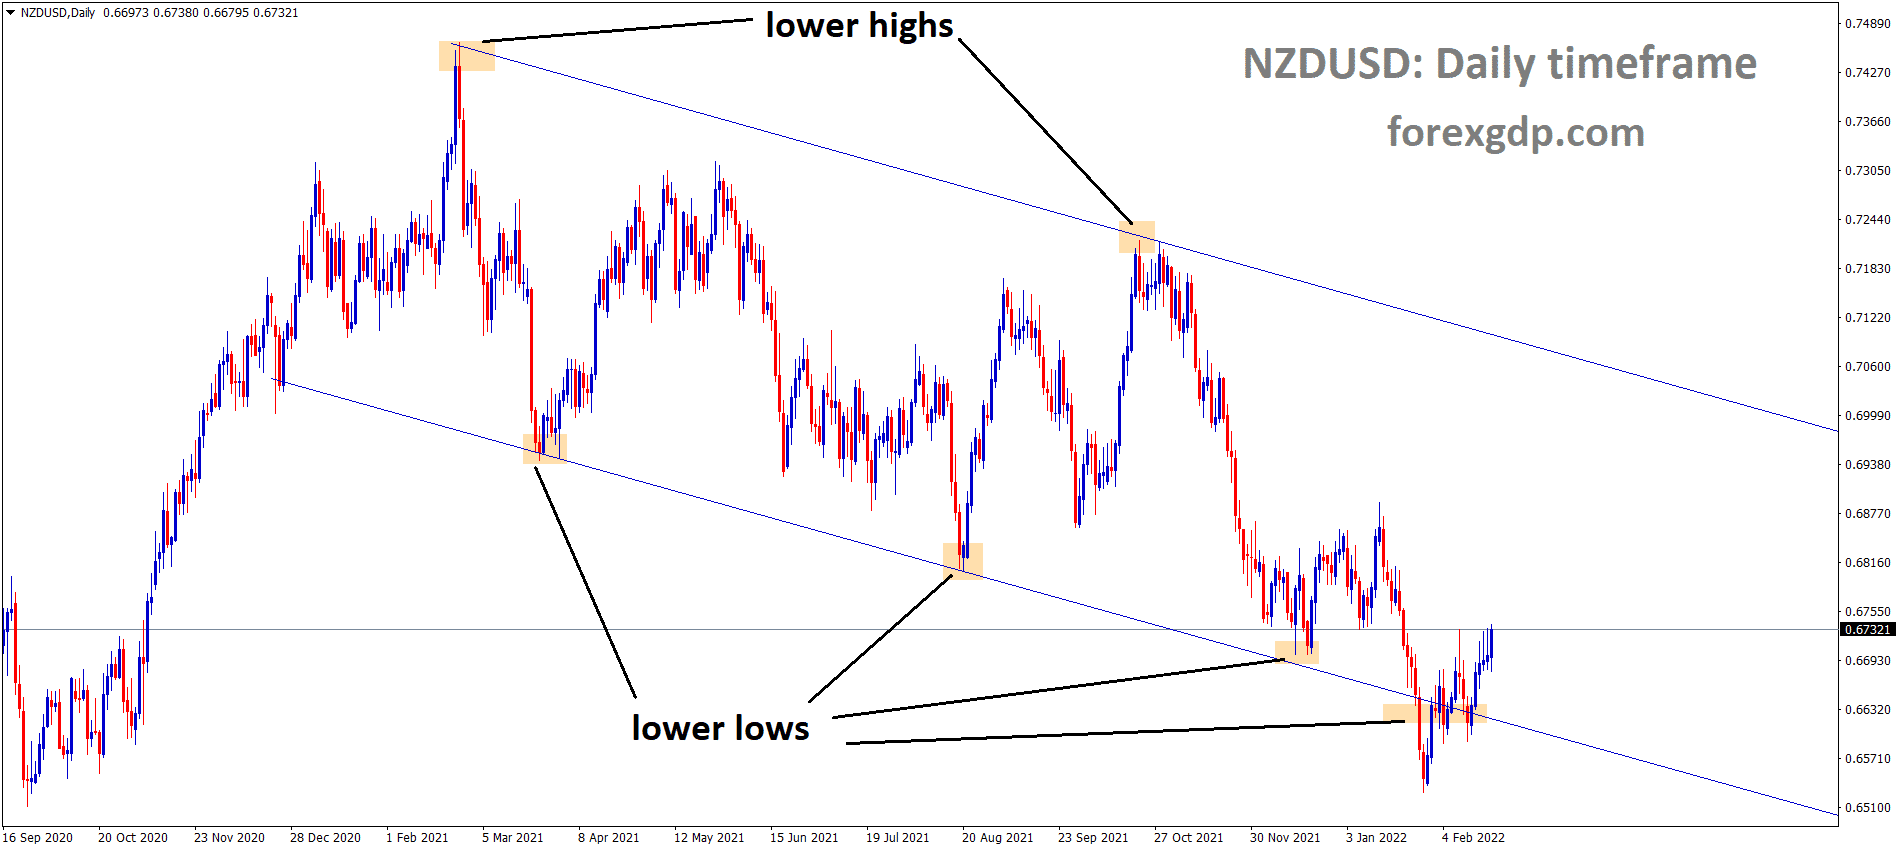 NZDUSD is moving in the Descending channel and the market has rebounded from the lower low area of the channel.